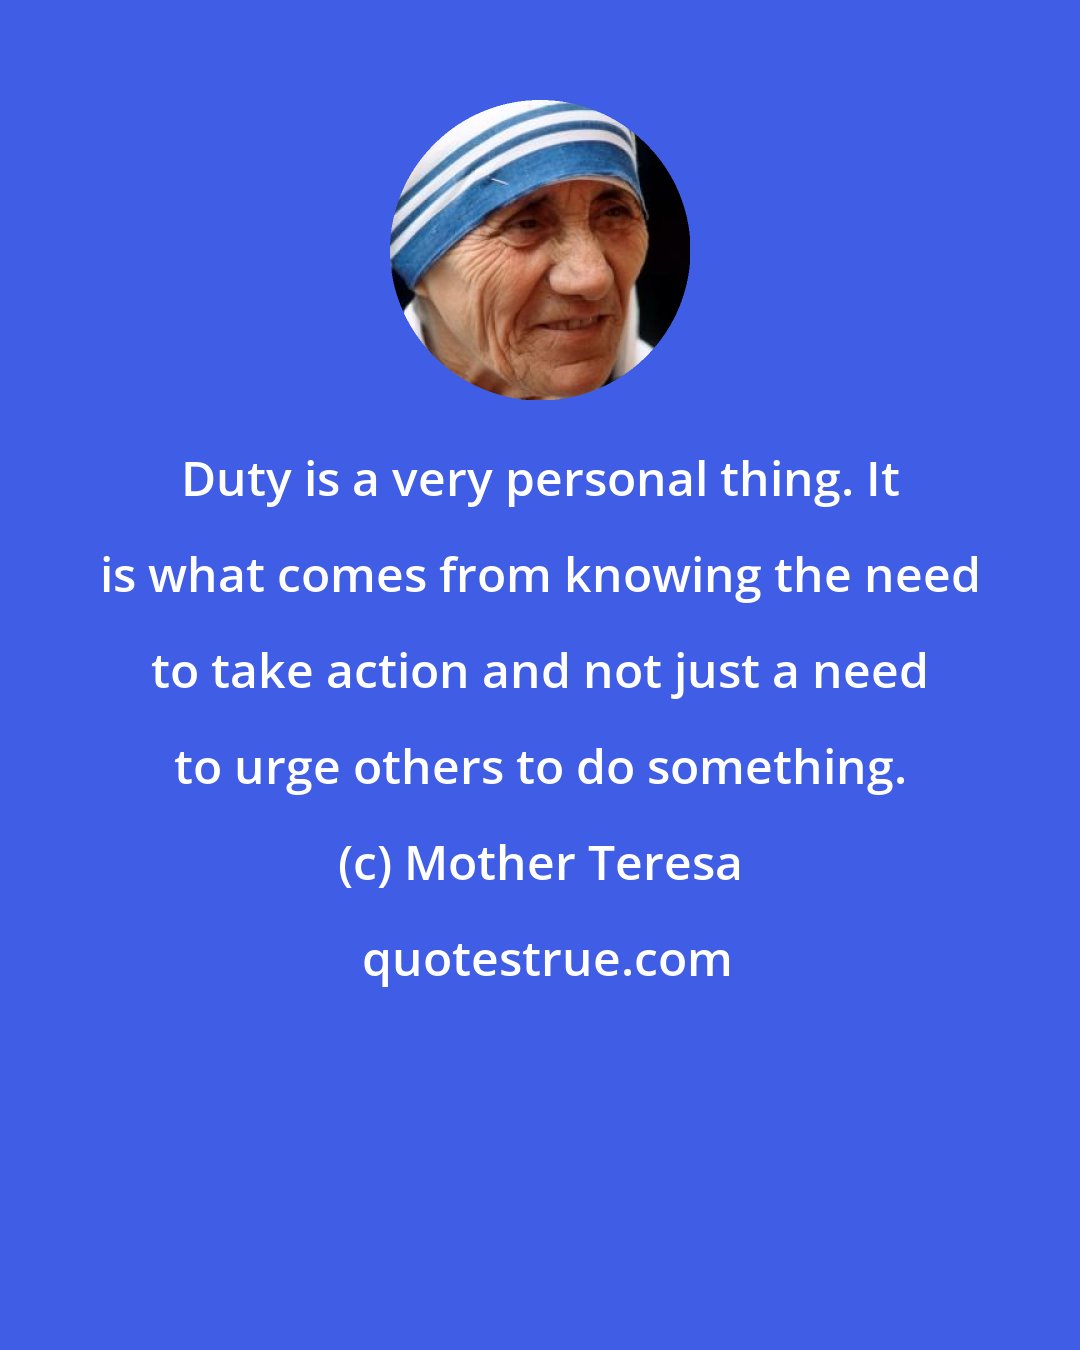 Mother Teresa: Duty is a very personal thing. It is what comes from knowing the need to take action and not just a need to urge others to do something.